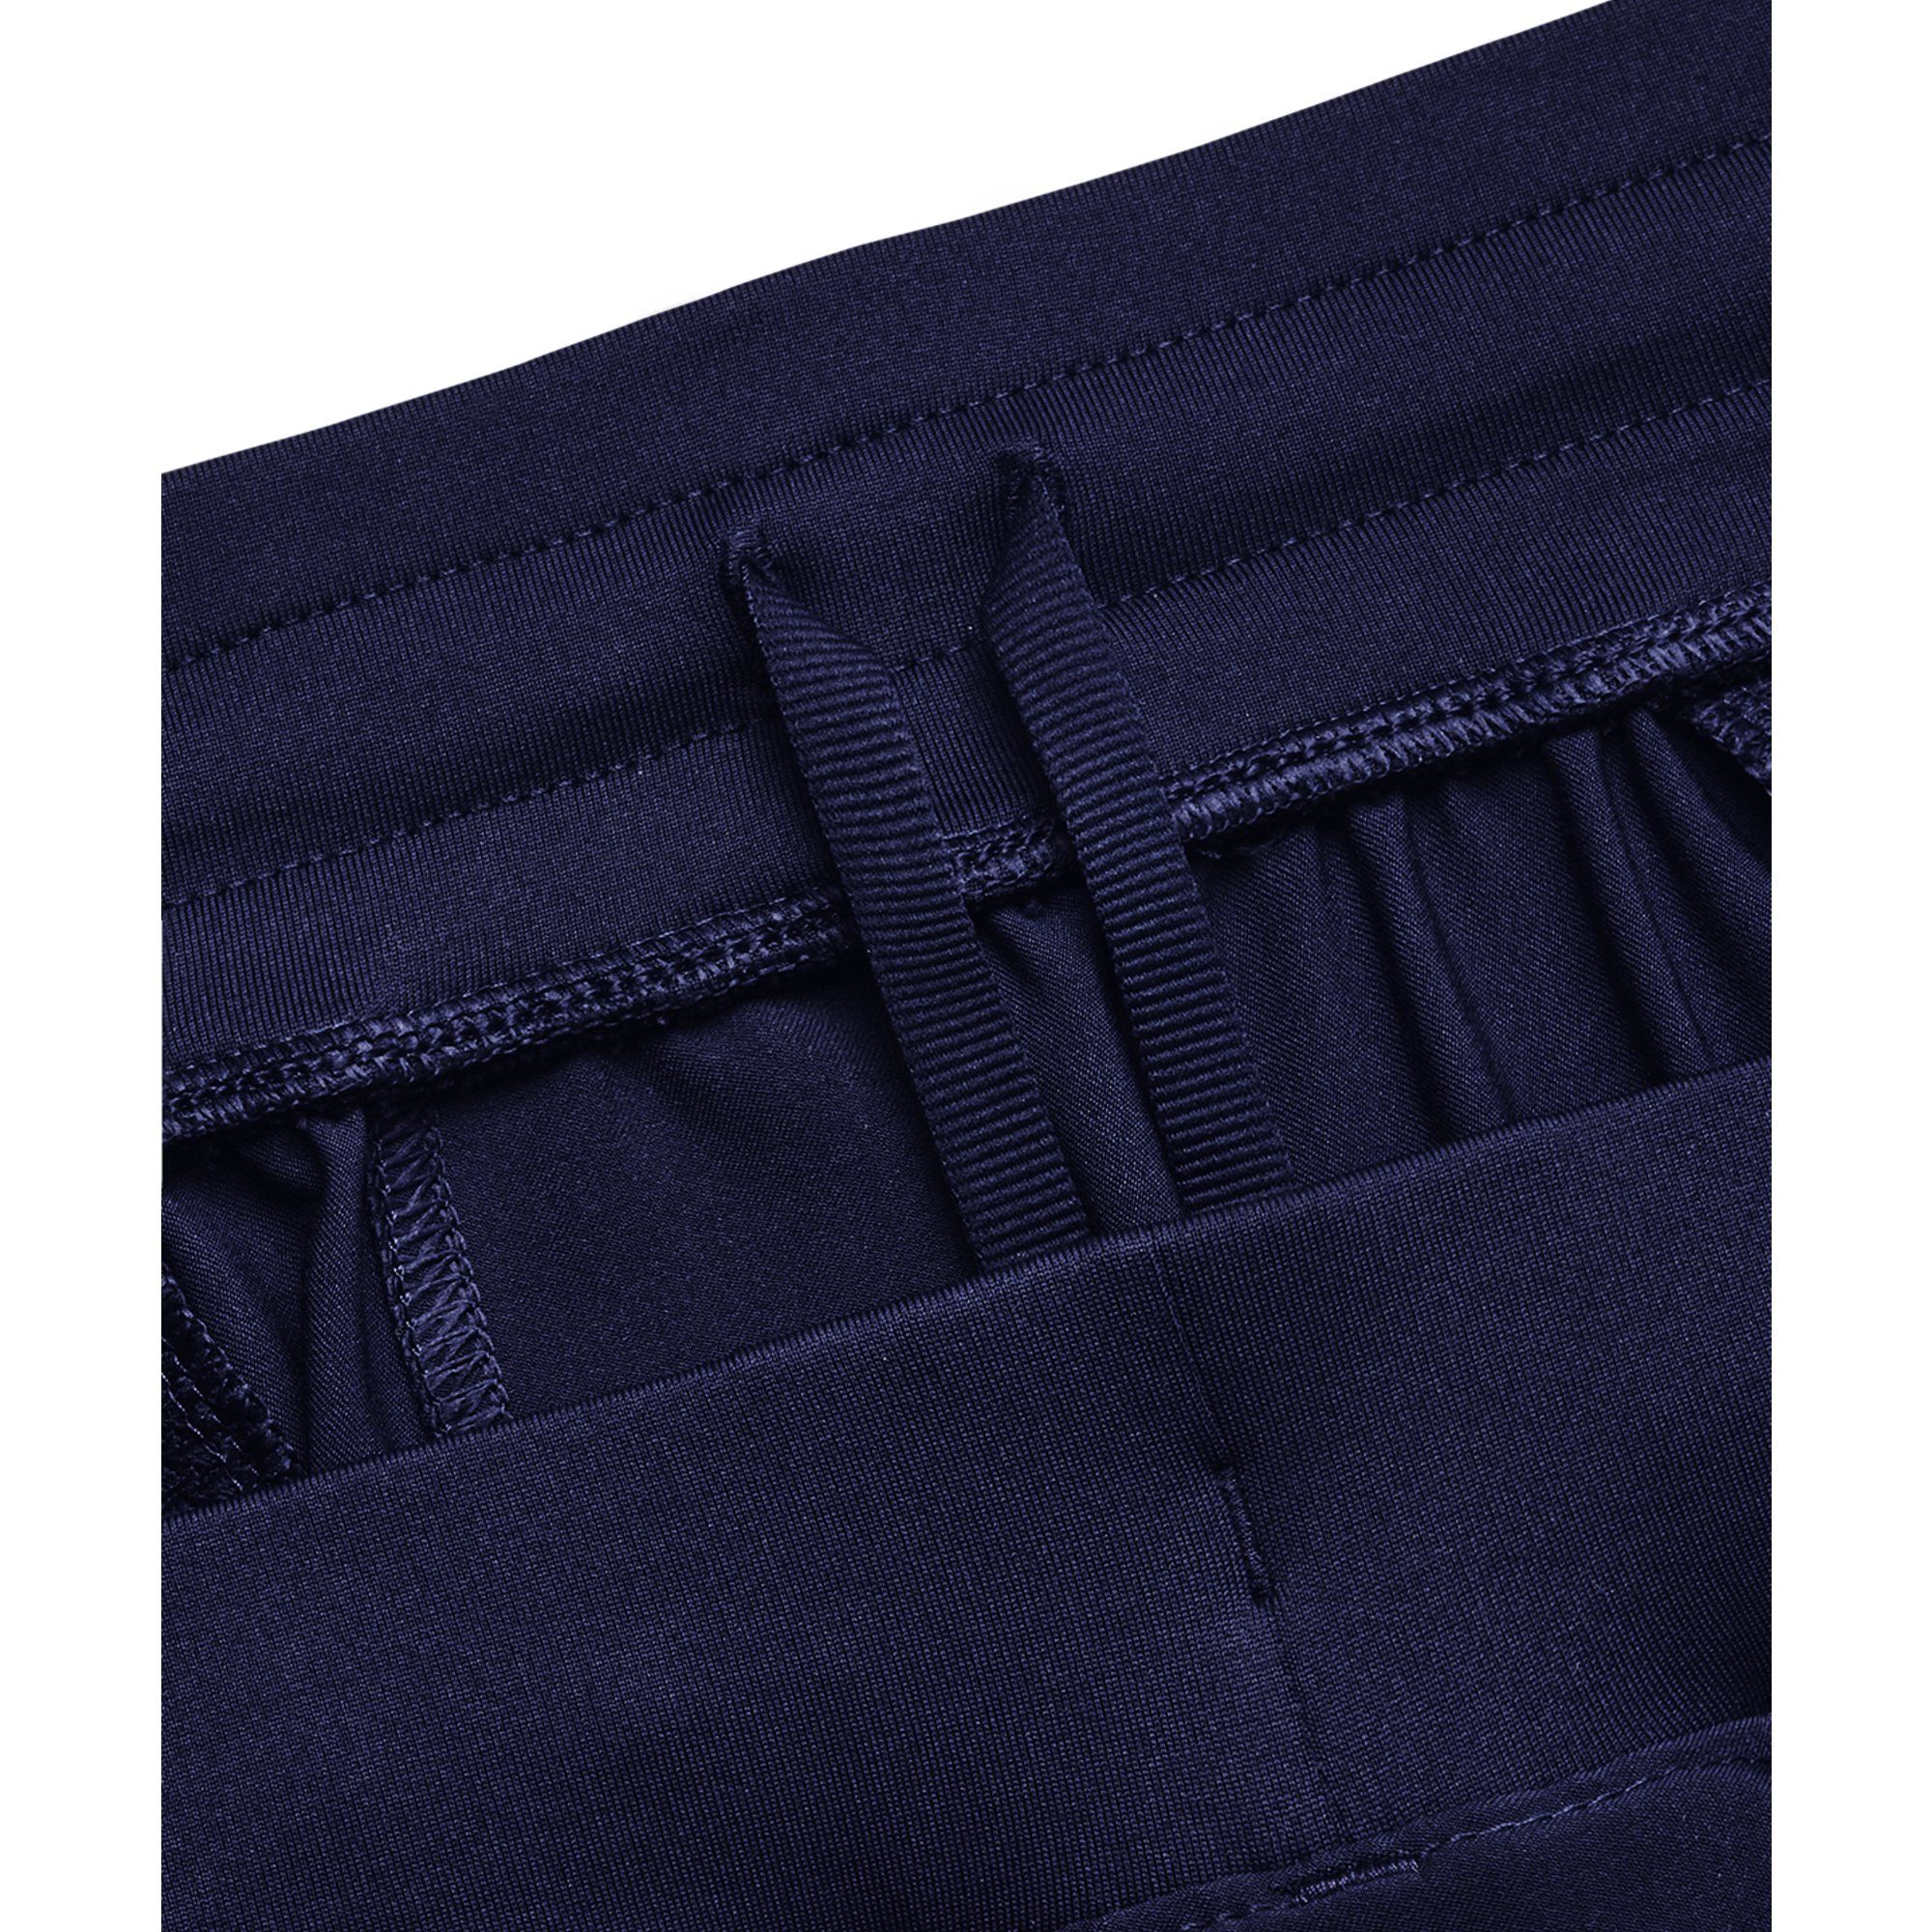  Under Armour Unstoppable Cargo Pants - Navy 